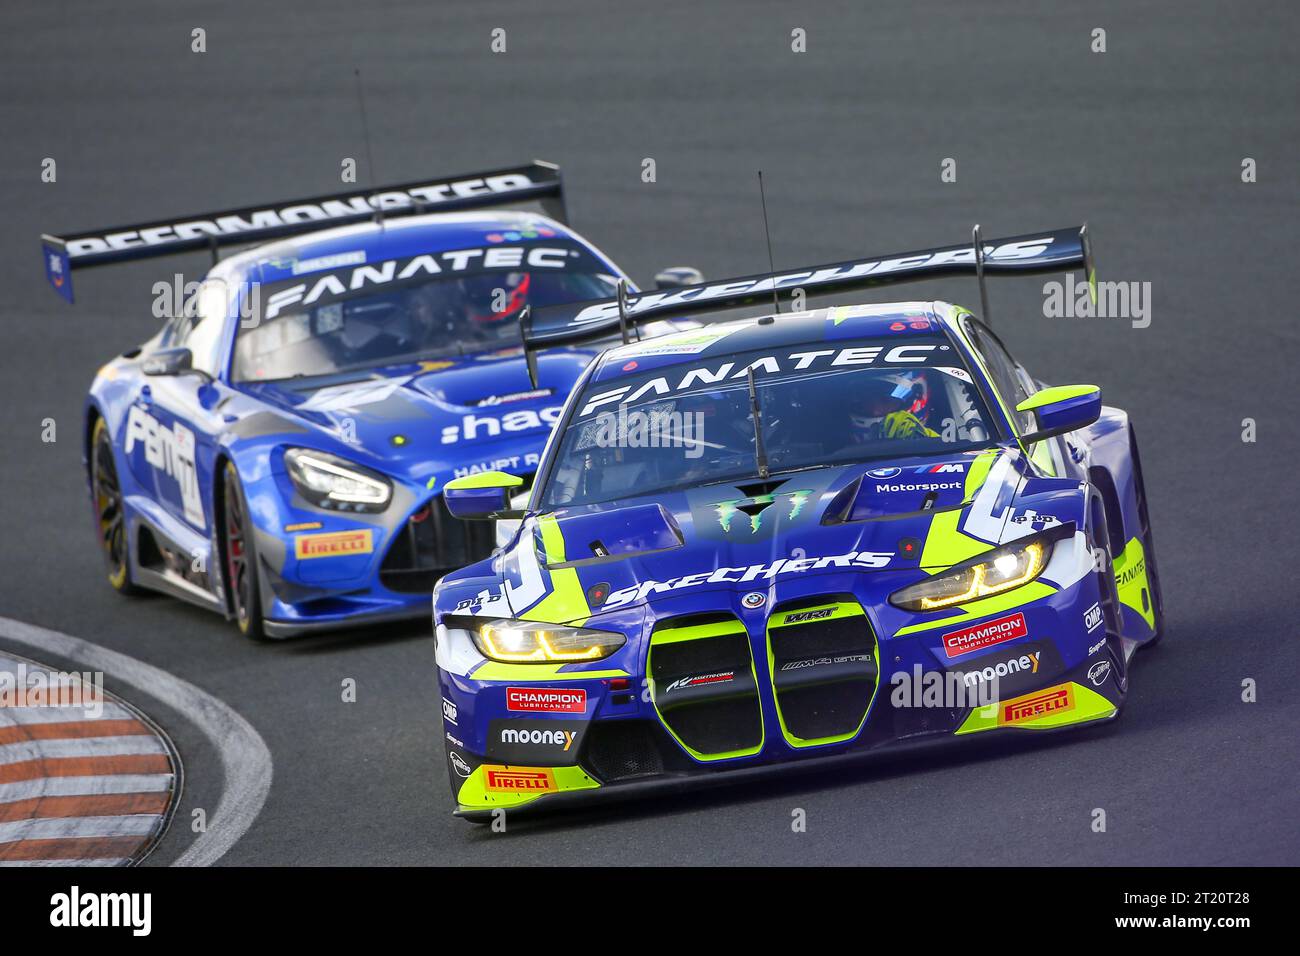 # 46, Zandvoort, NL Sunday 15th of OCTOBRE 2023: Valentino Rossi, Maxime Martine, Team WRT, BMW M4 GT3 car, PRO, during the Races of the Zandvoort Sprint Cup race on Octobre 15th. The Team WRT races in the PRO class in the Fanatec GT World Challenge Europe powered by AWS event on the Zandvoort circuit, fee liable image, Photo copyright © ATP Geert FRANQUET (FRANQUET Geert  / ATP / SPP) Stock Photo